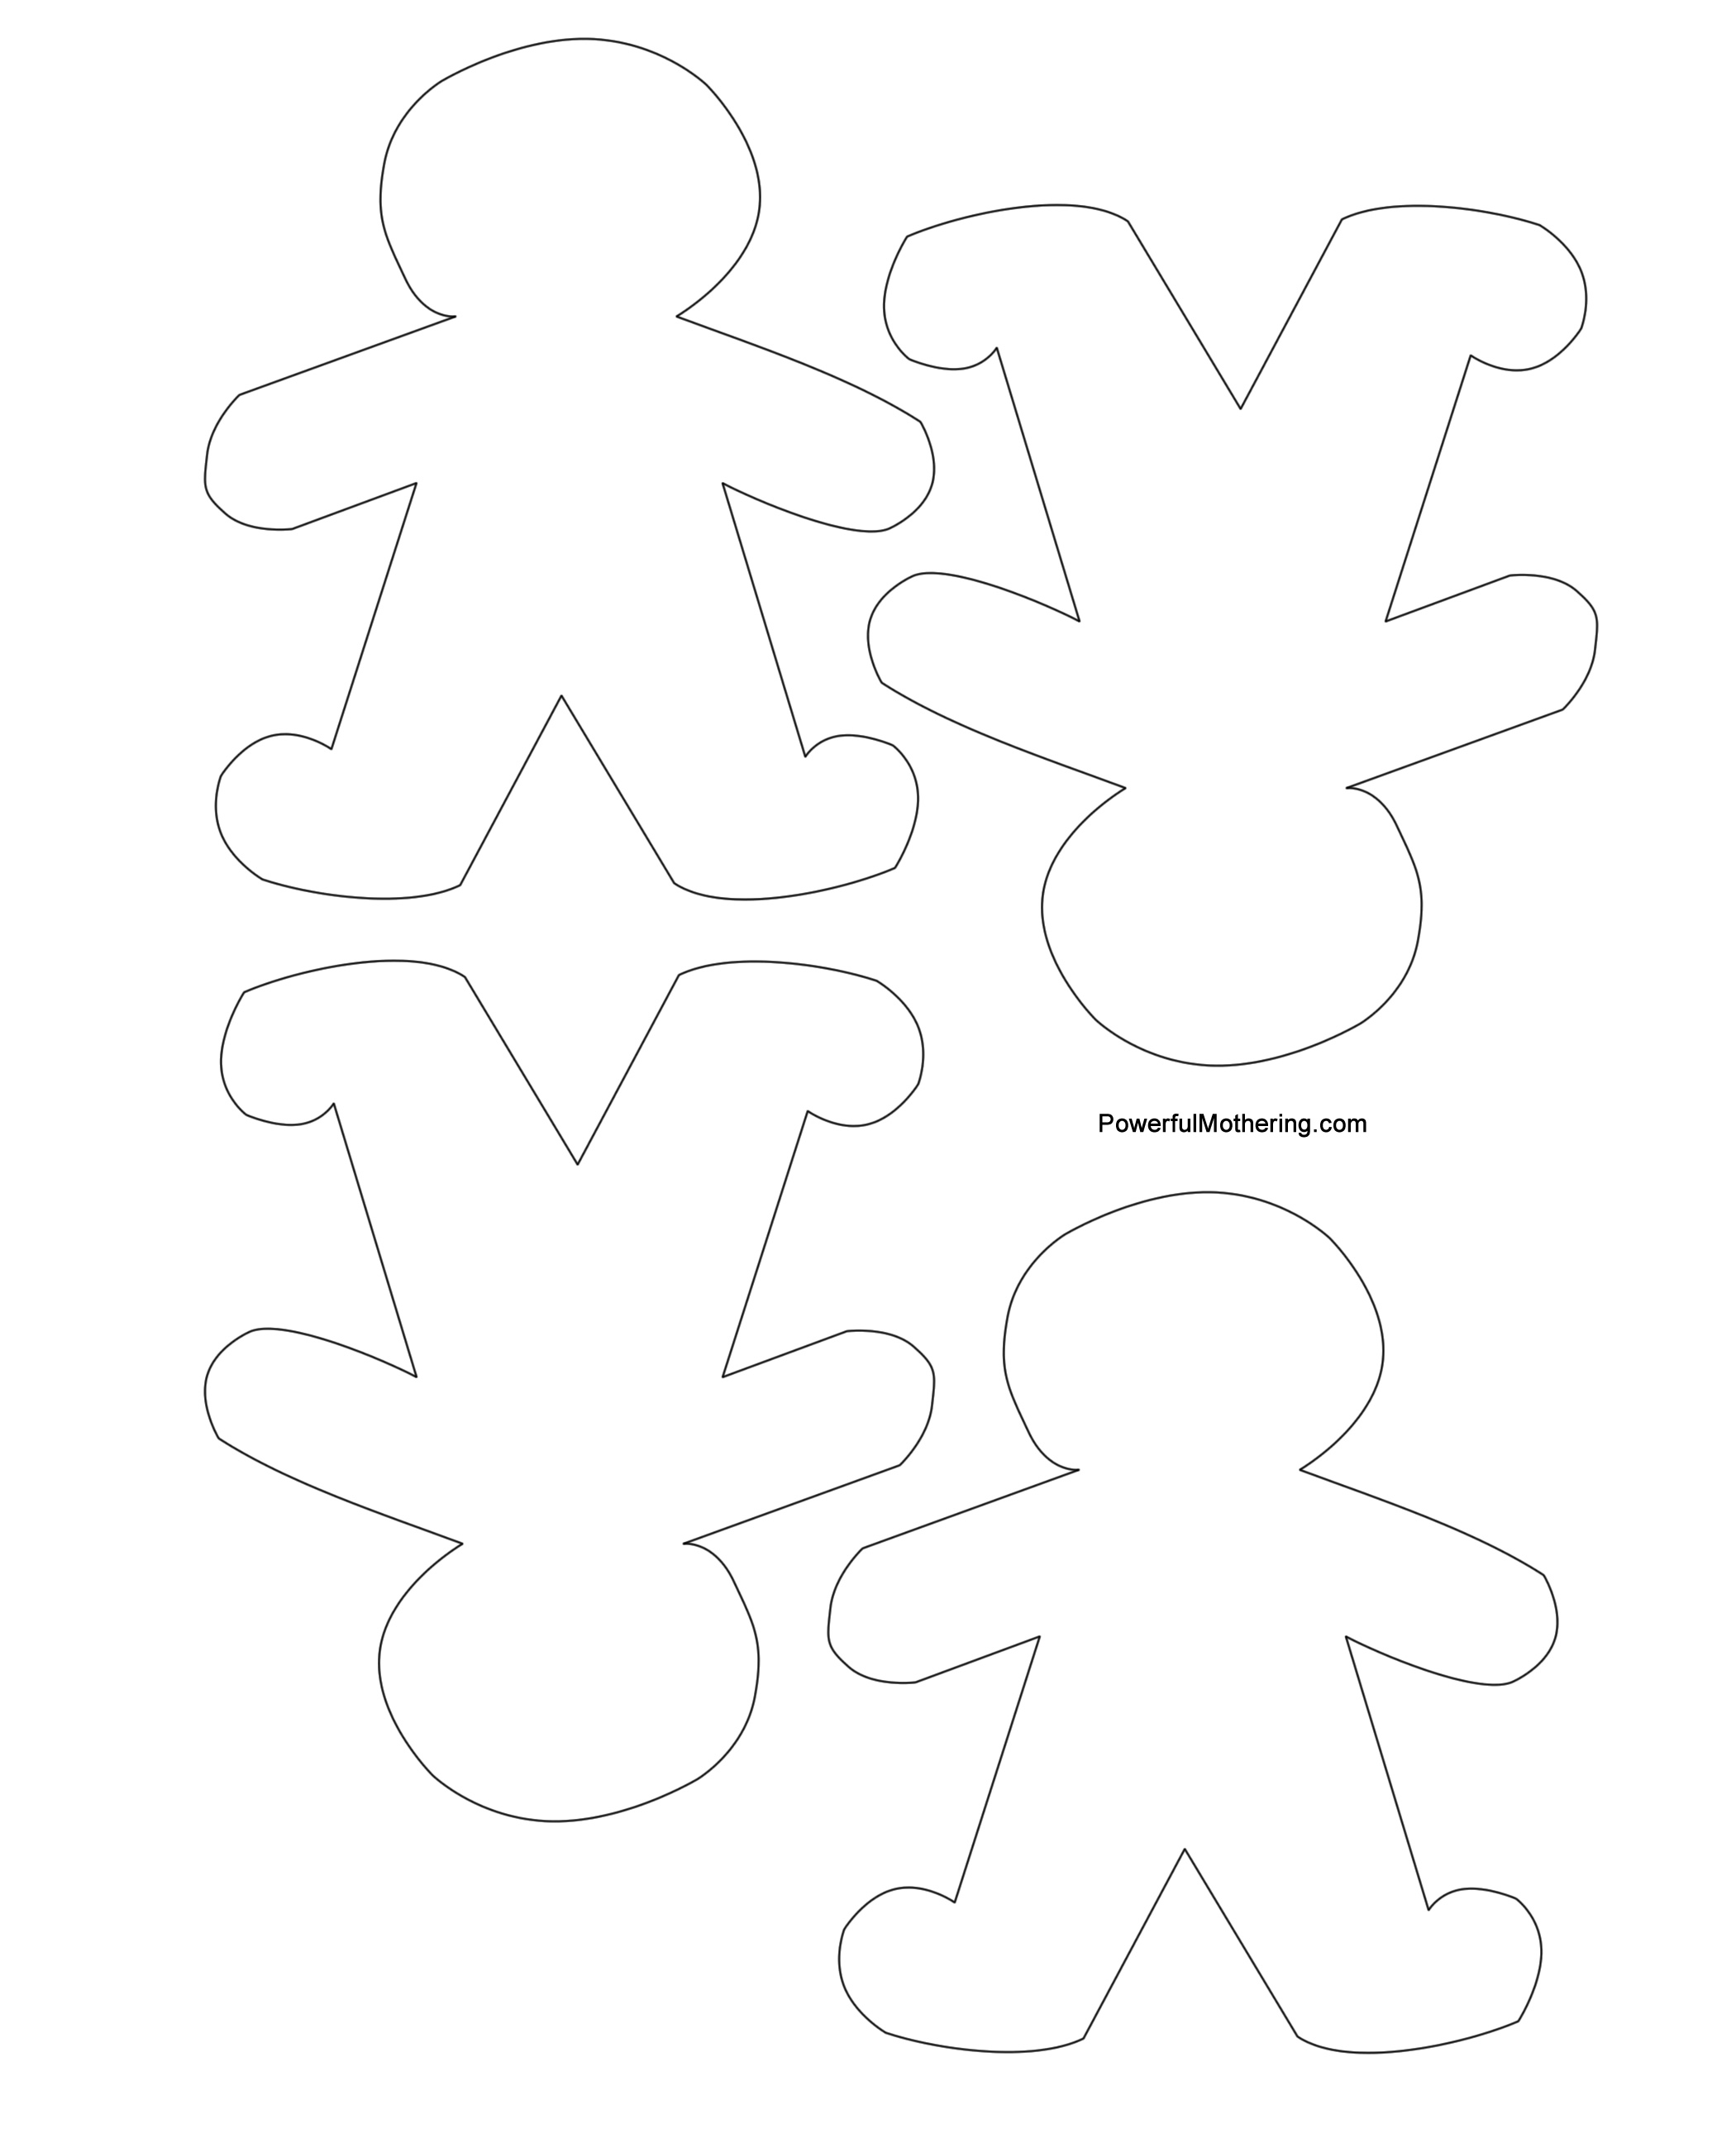 Gingerbread Men, Christmas Tree and Star Printables
